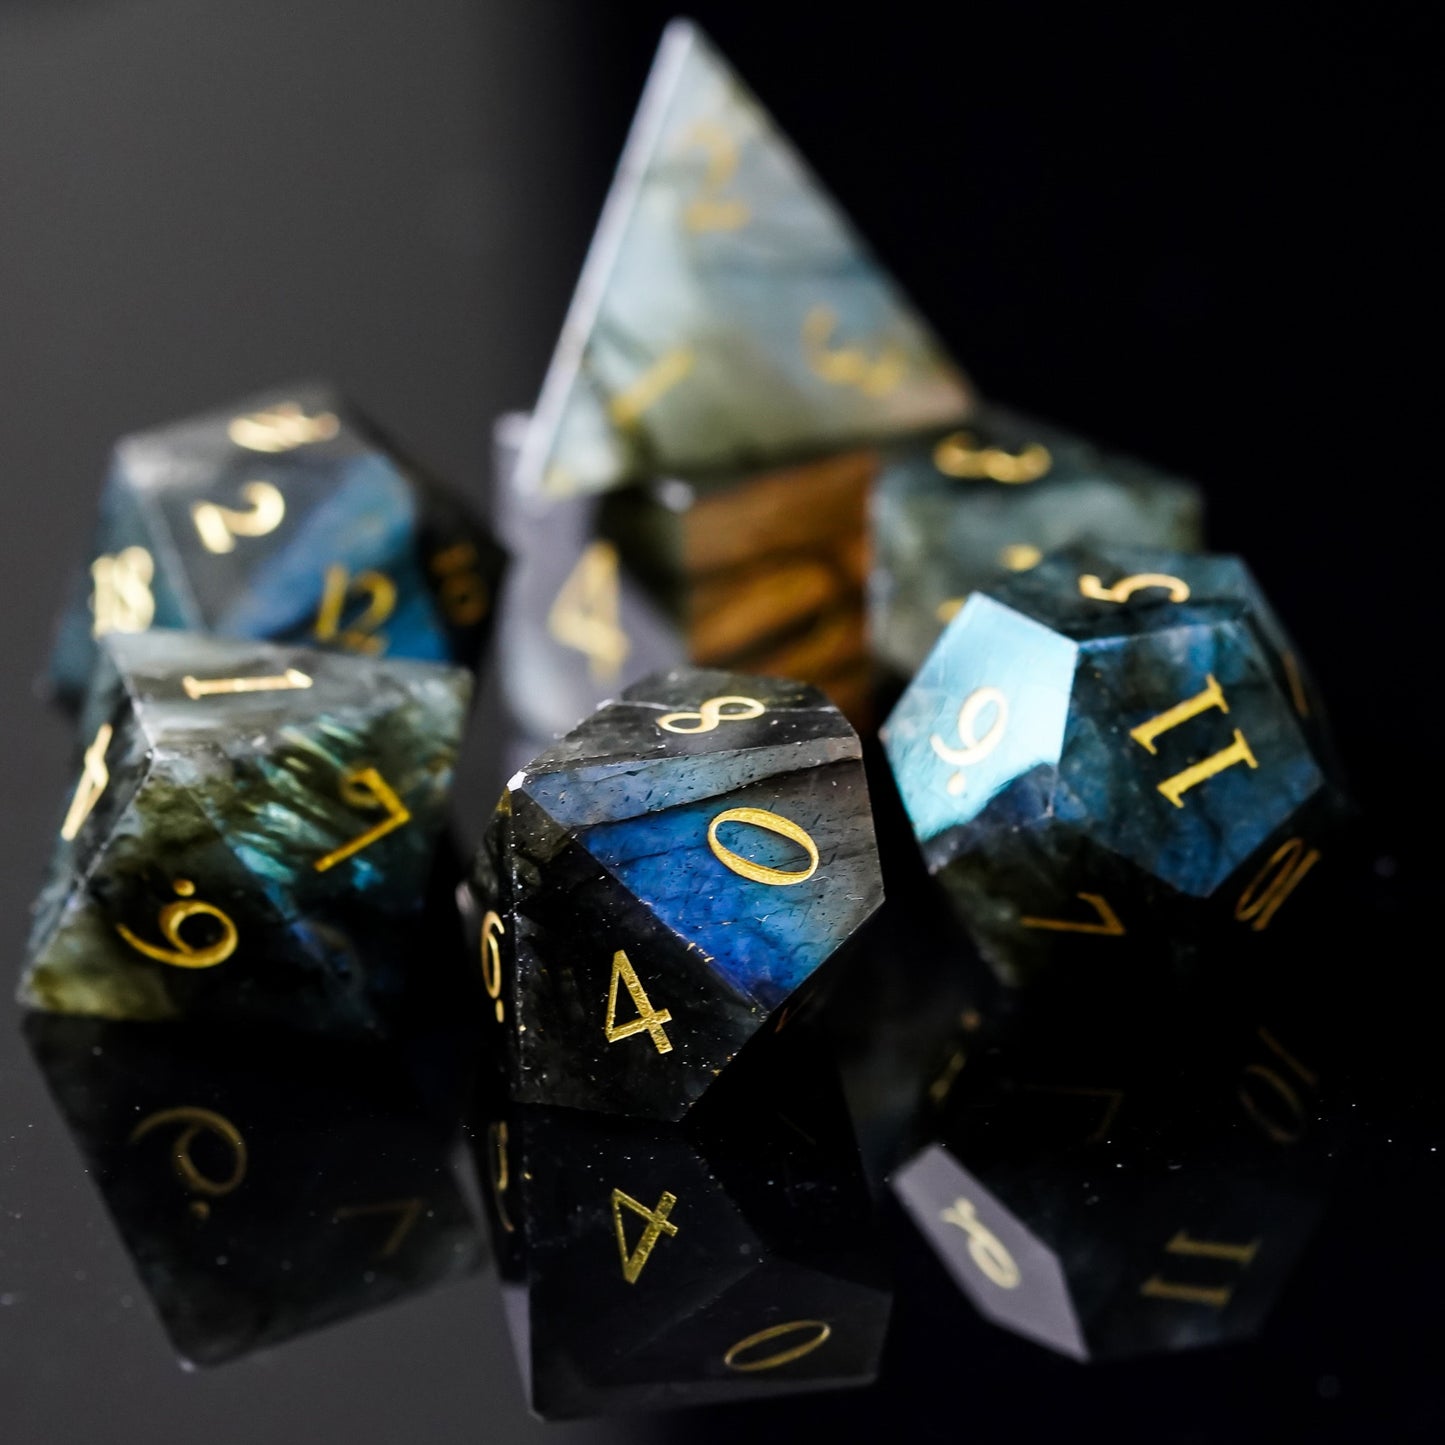 7 piece stone dice set, dark blue and black coloring with gold numbers